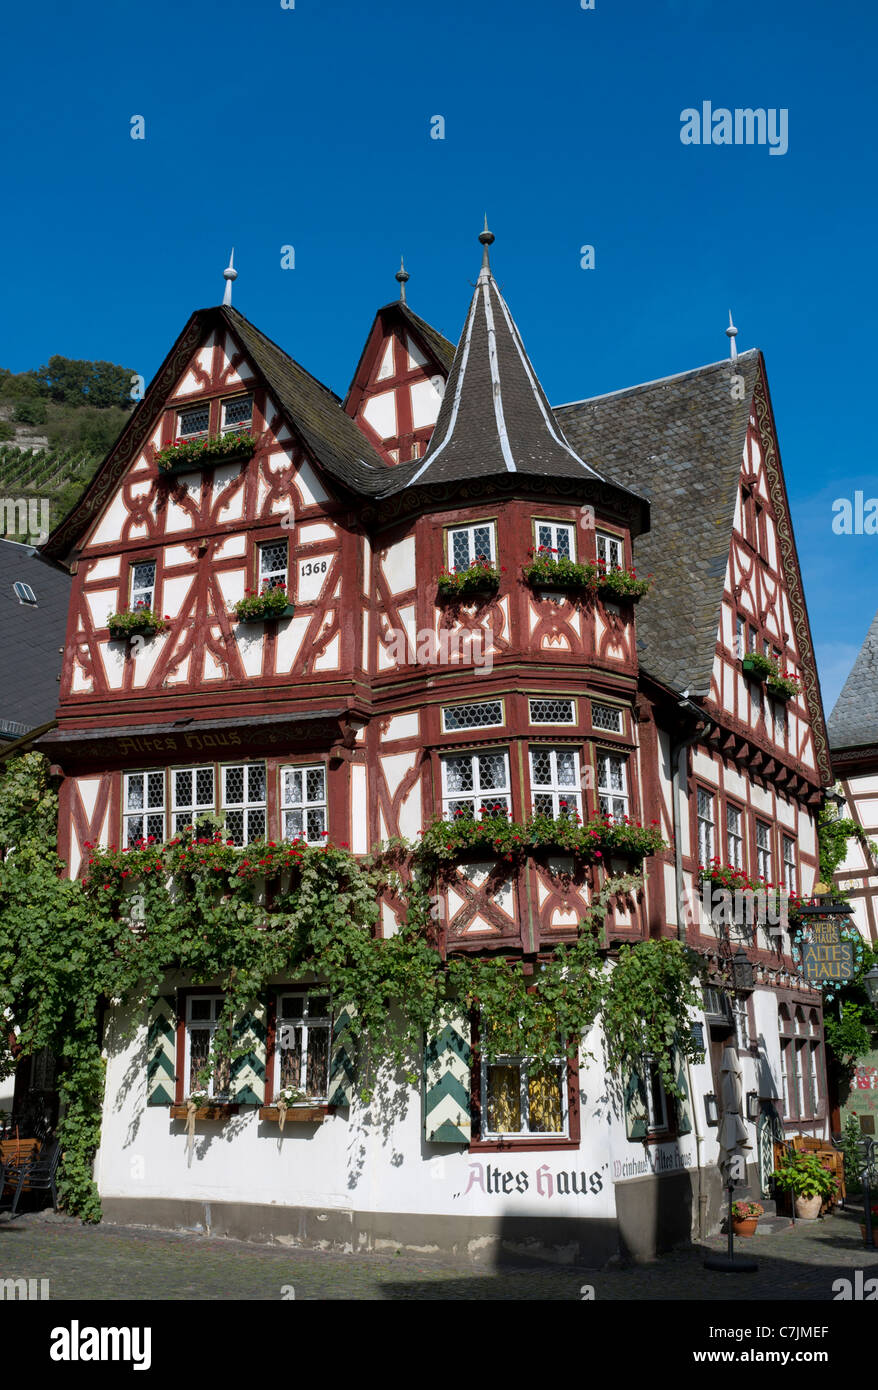 Bacharach; Old Altes Haus half-timbered historic landmark building in  Bacharach Rhineland on River Rhine Germany Stock Photo